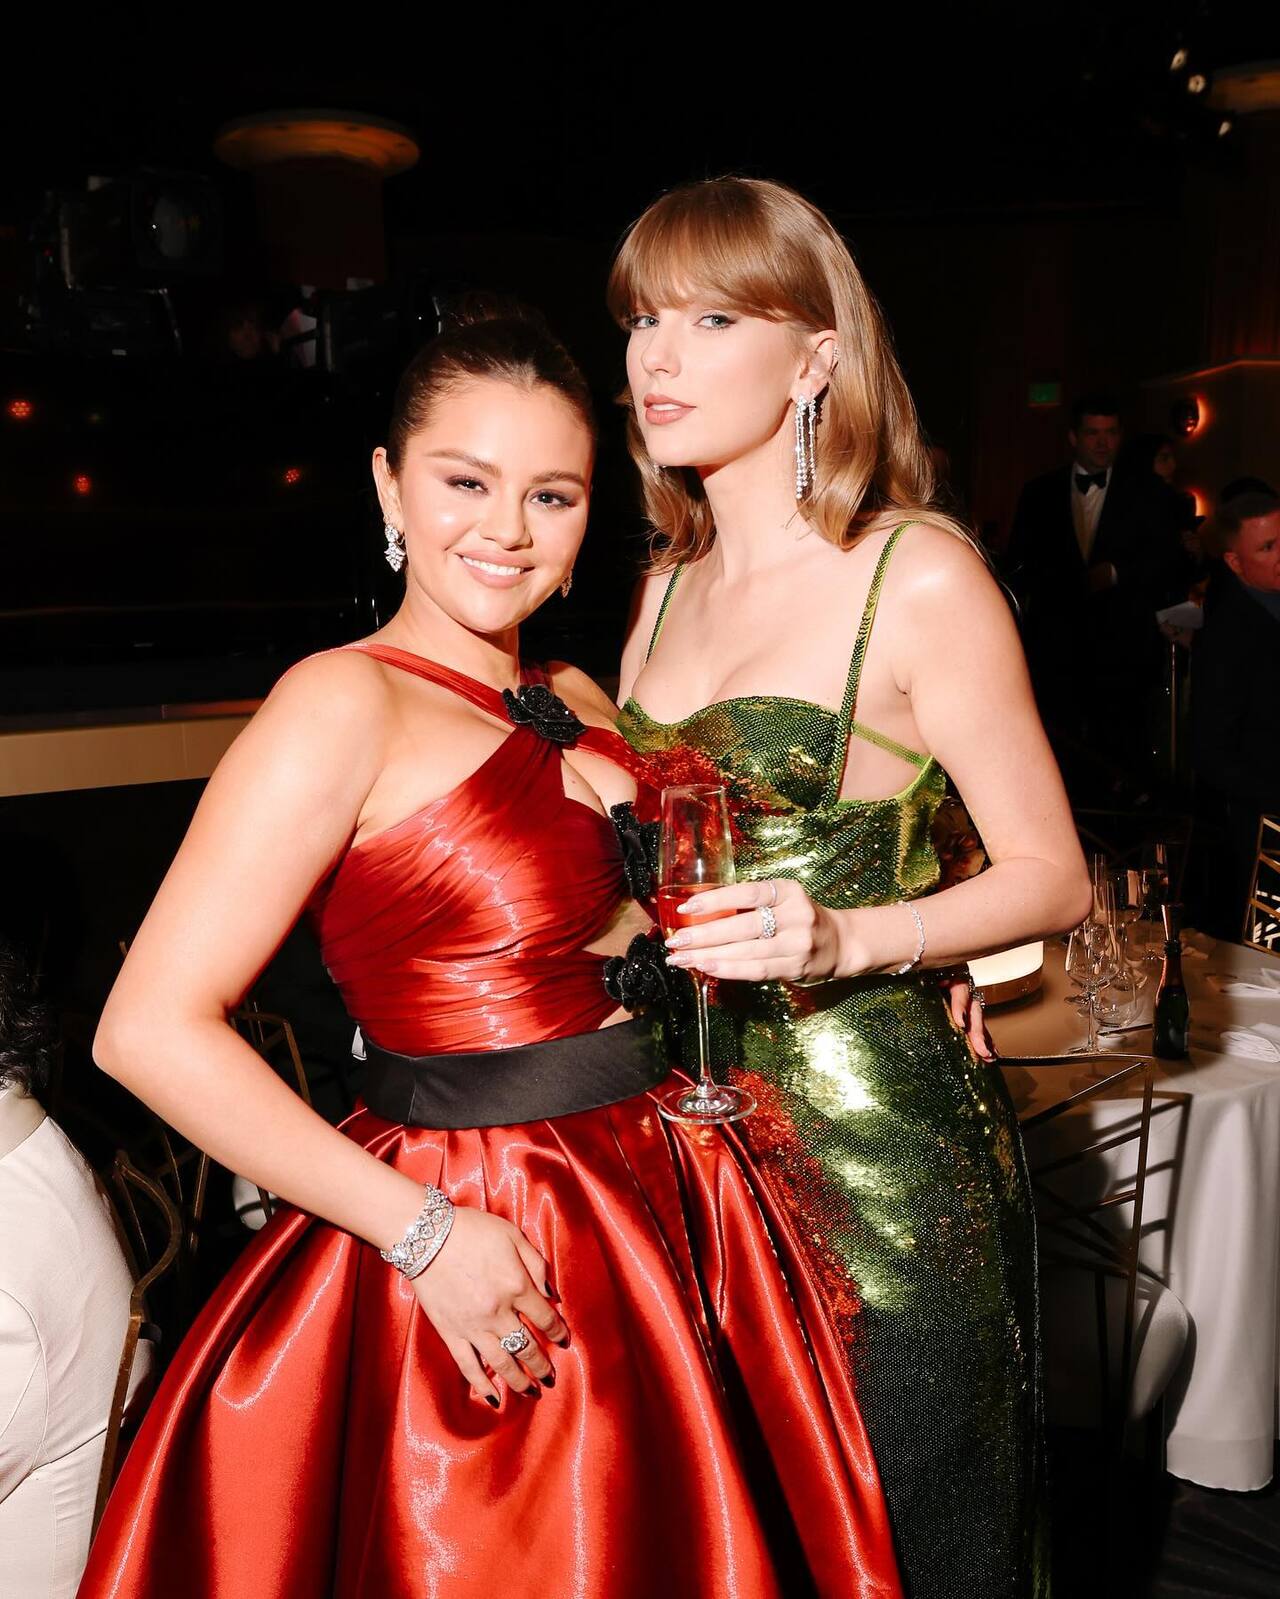 Taylor Swift made heads turn in a sparkly green outfit and posed with close friend Selena Gomez who was dressed in red outfit